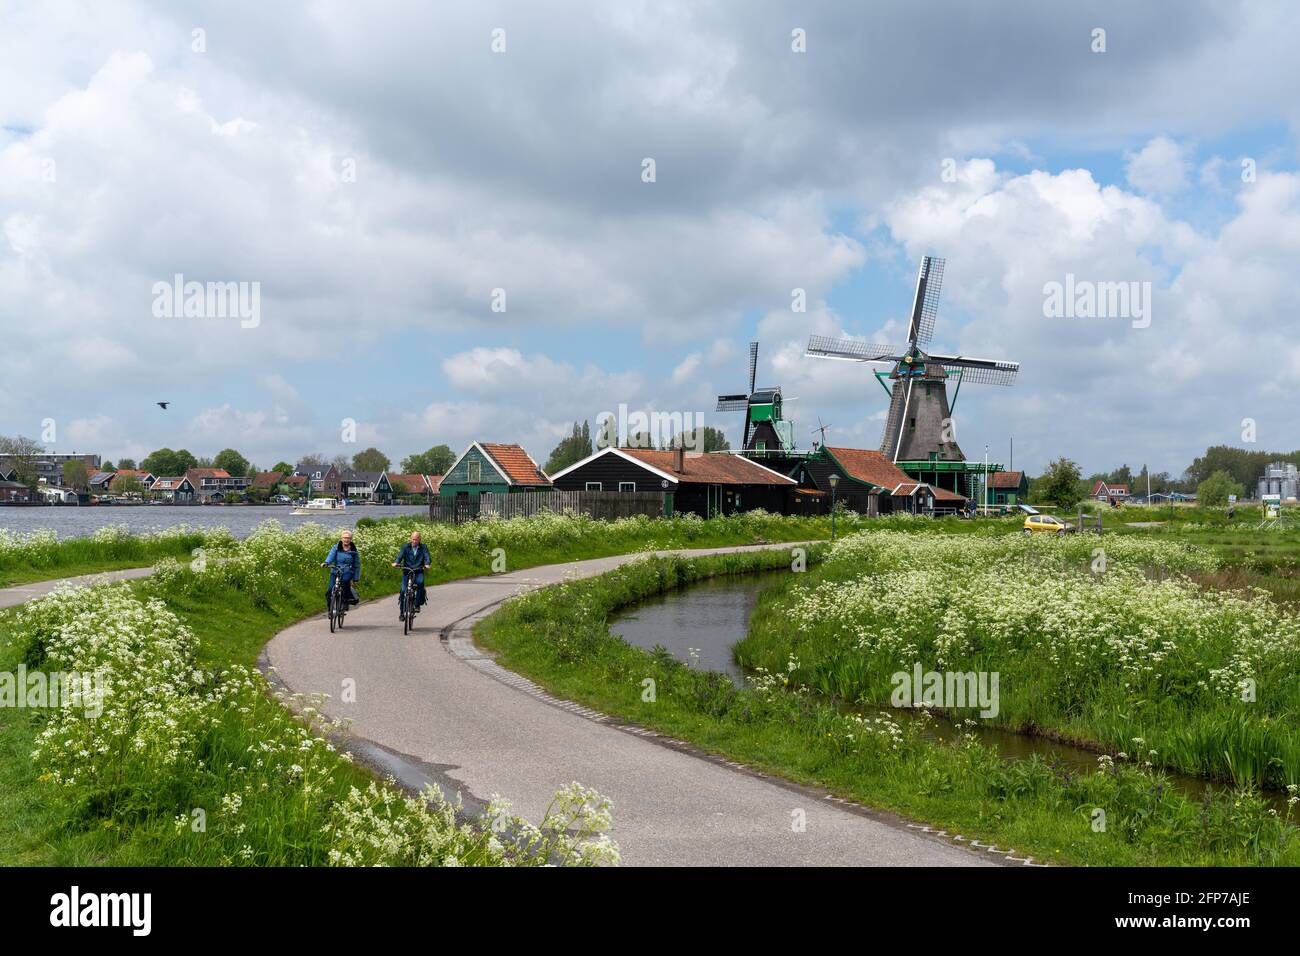 Zaandam, Netherlands - 18 May, 2021: Dutch senior citizens enjoy a bicycle ride along the canals of North Holland with traditional windmills in the ba Stock Photo